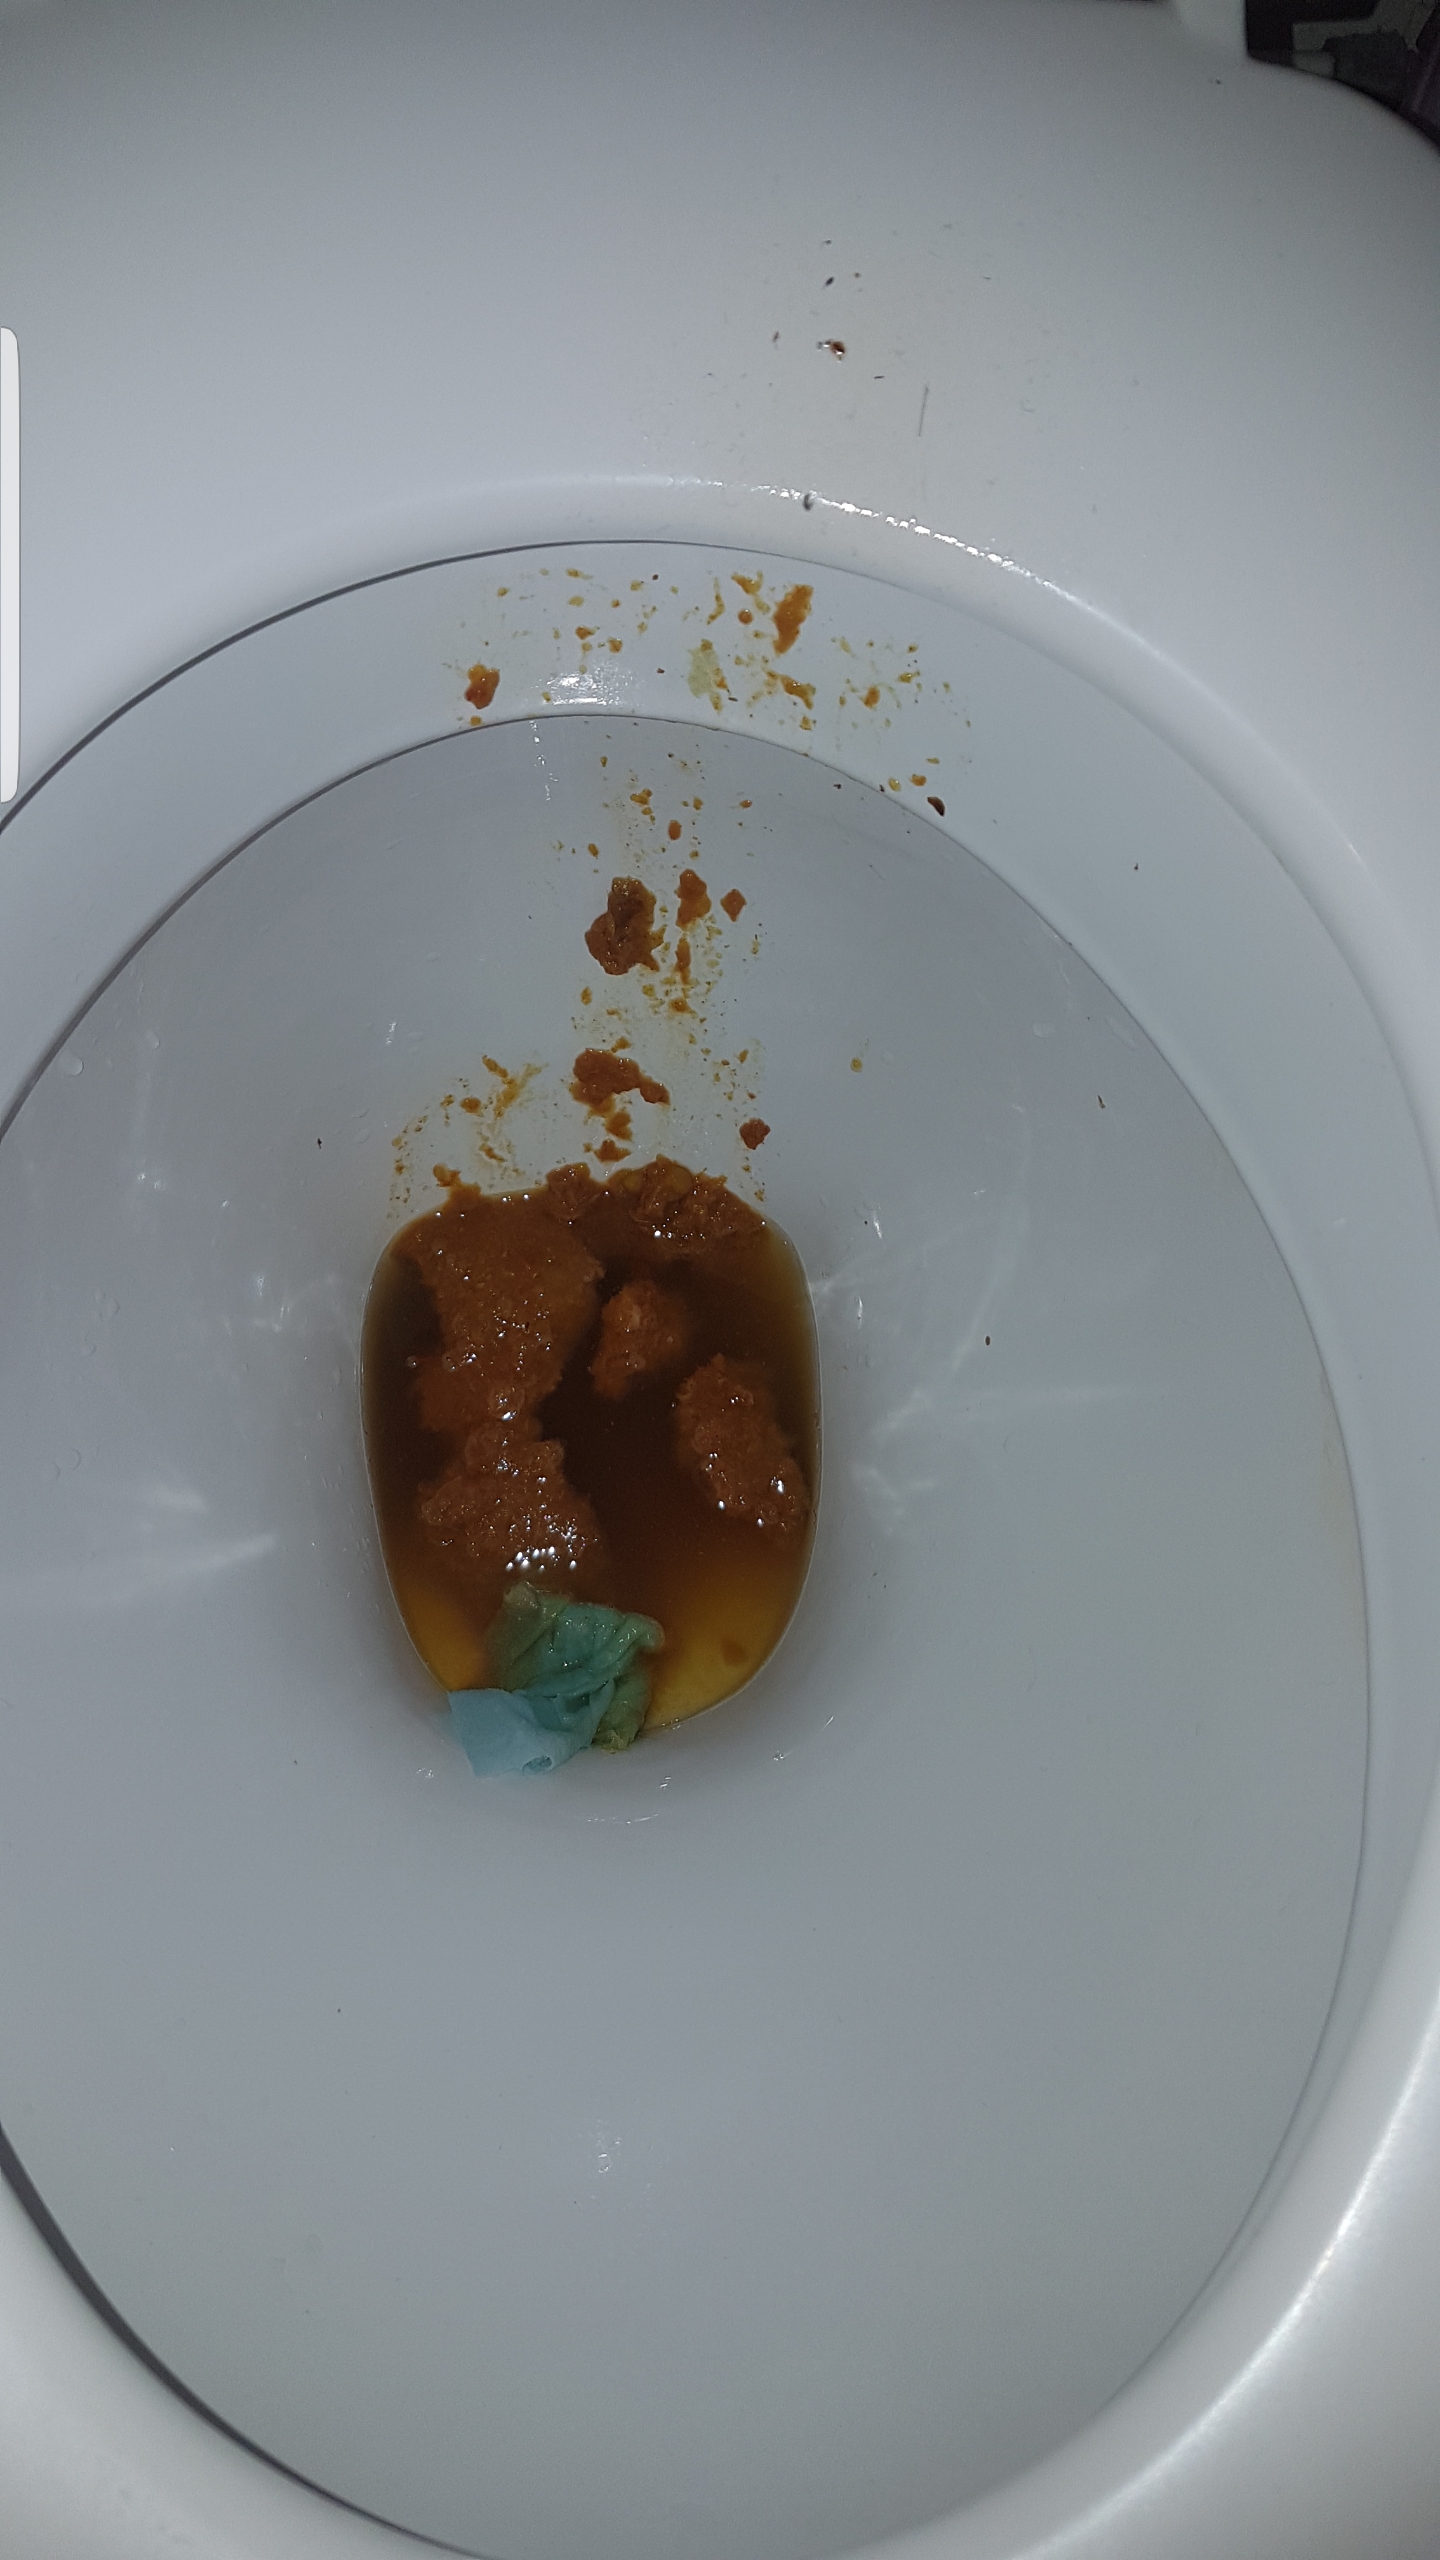 Loose shit before work on connors loo